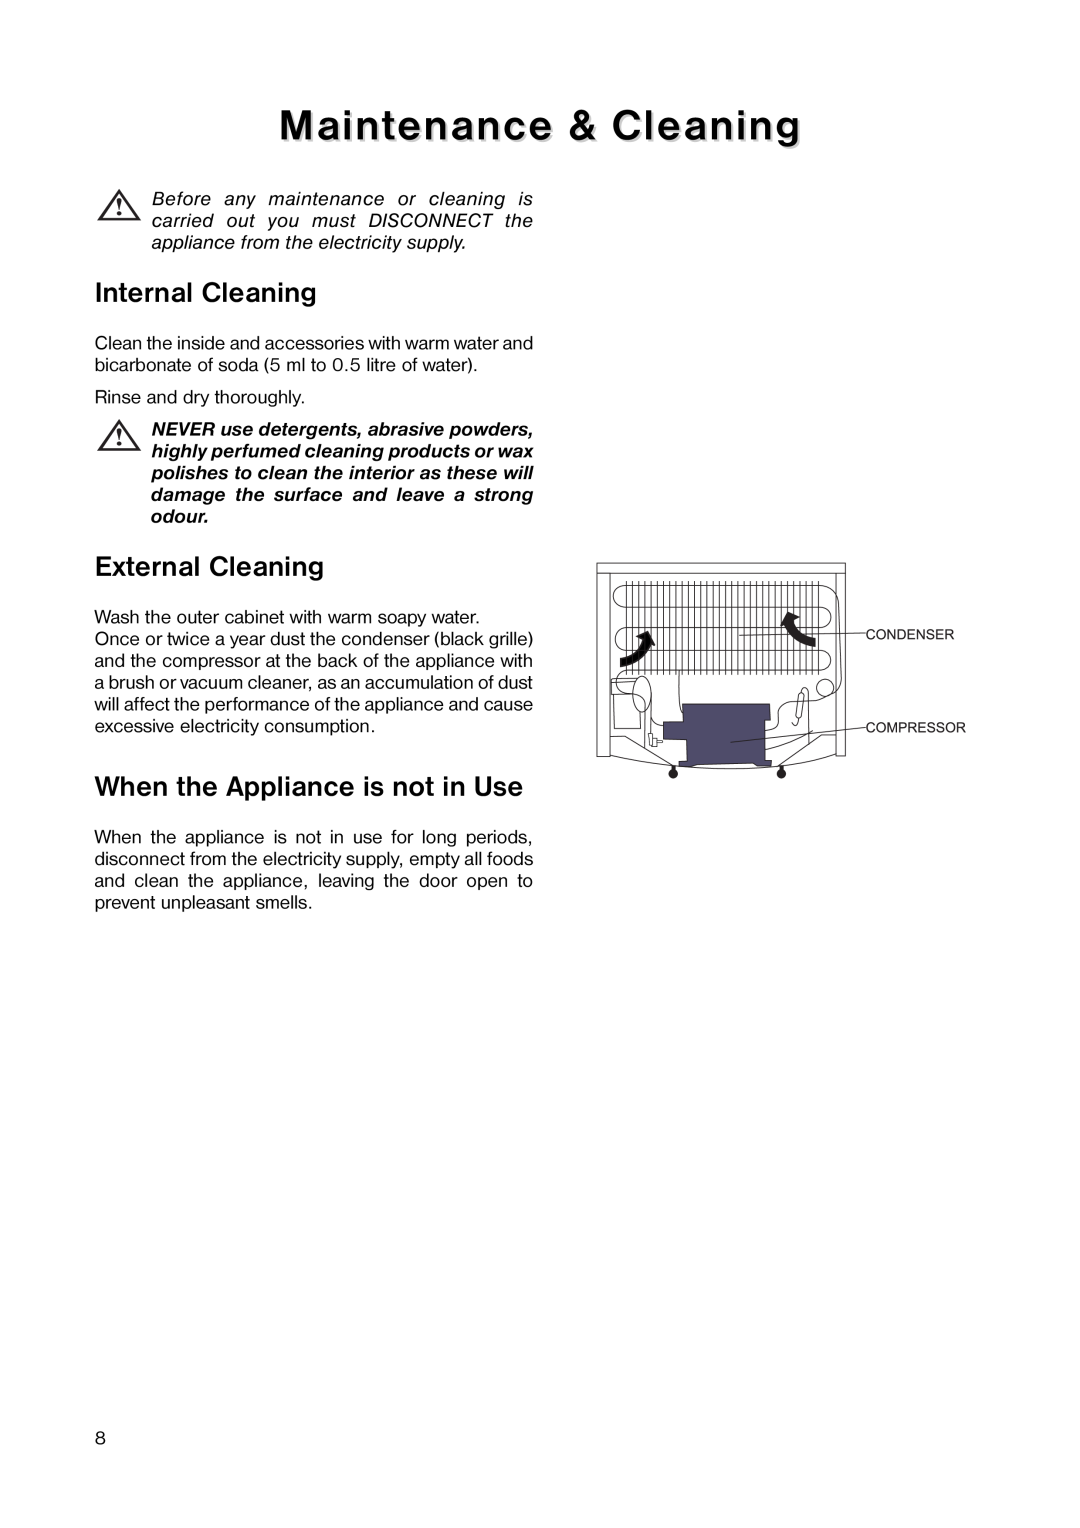 Electrolux EU 5563 C manual Maintenance & Cleaning, Internal Cleaning, External Cleaning, When the Appliance is not in Use 